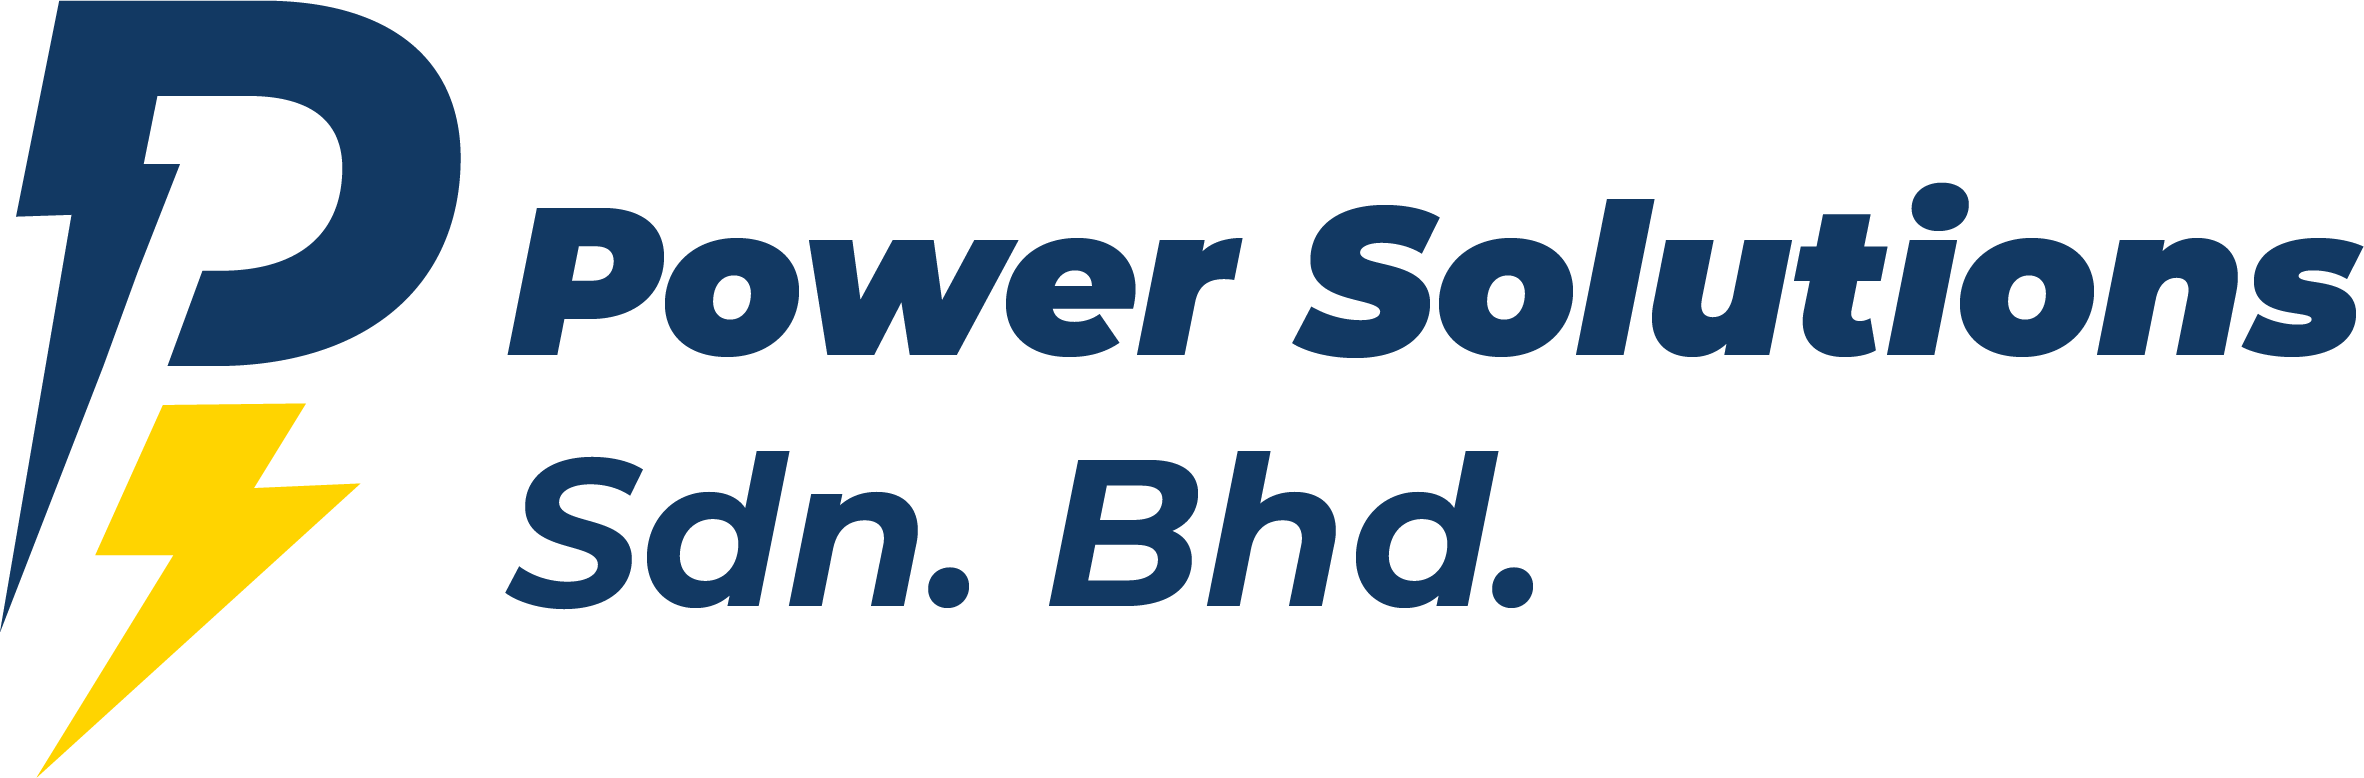 Power Solutions Sdn.Bhd